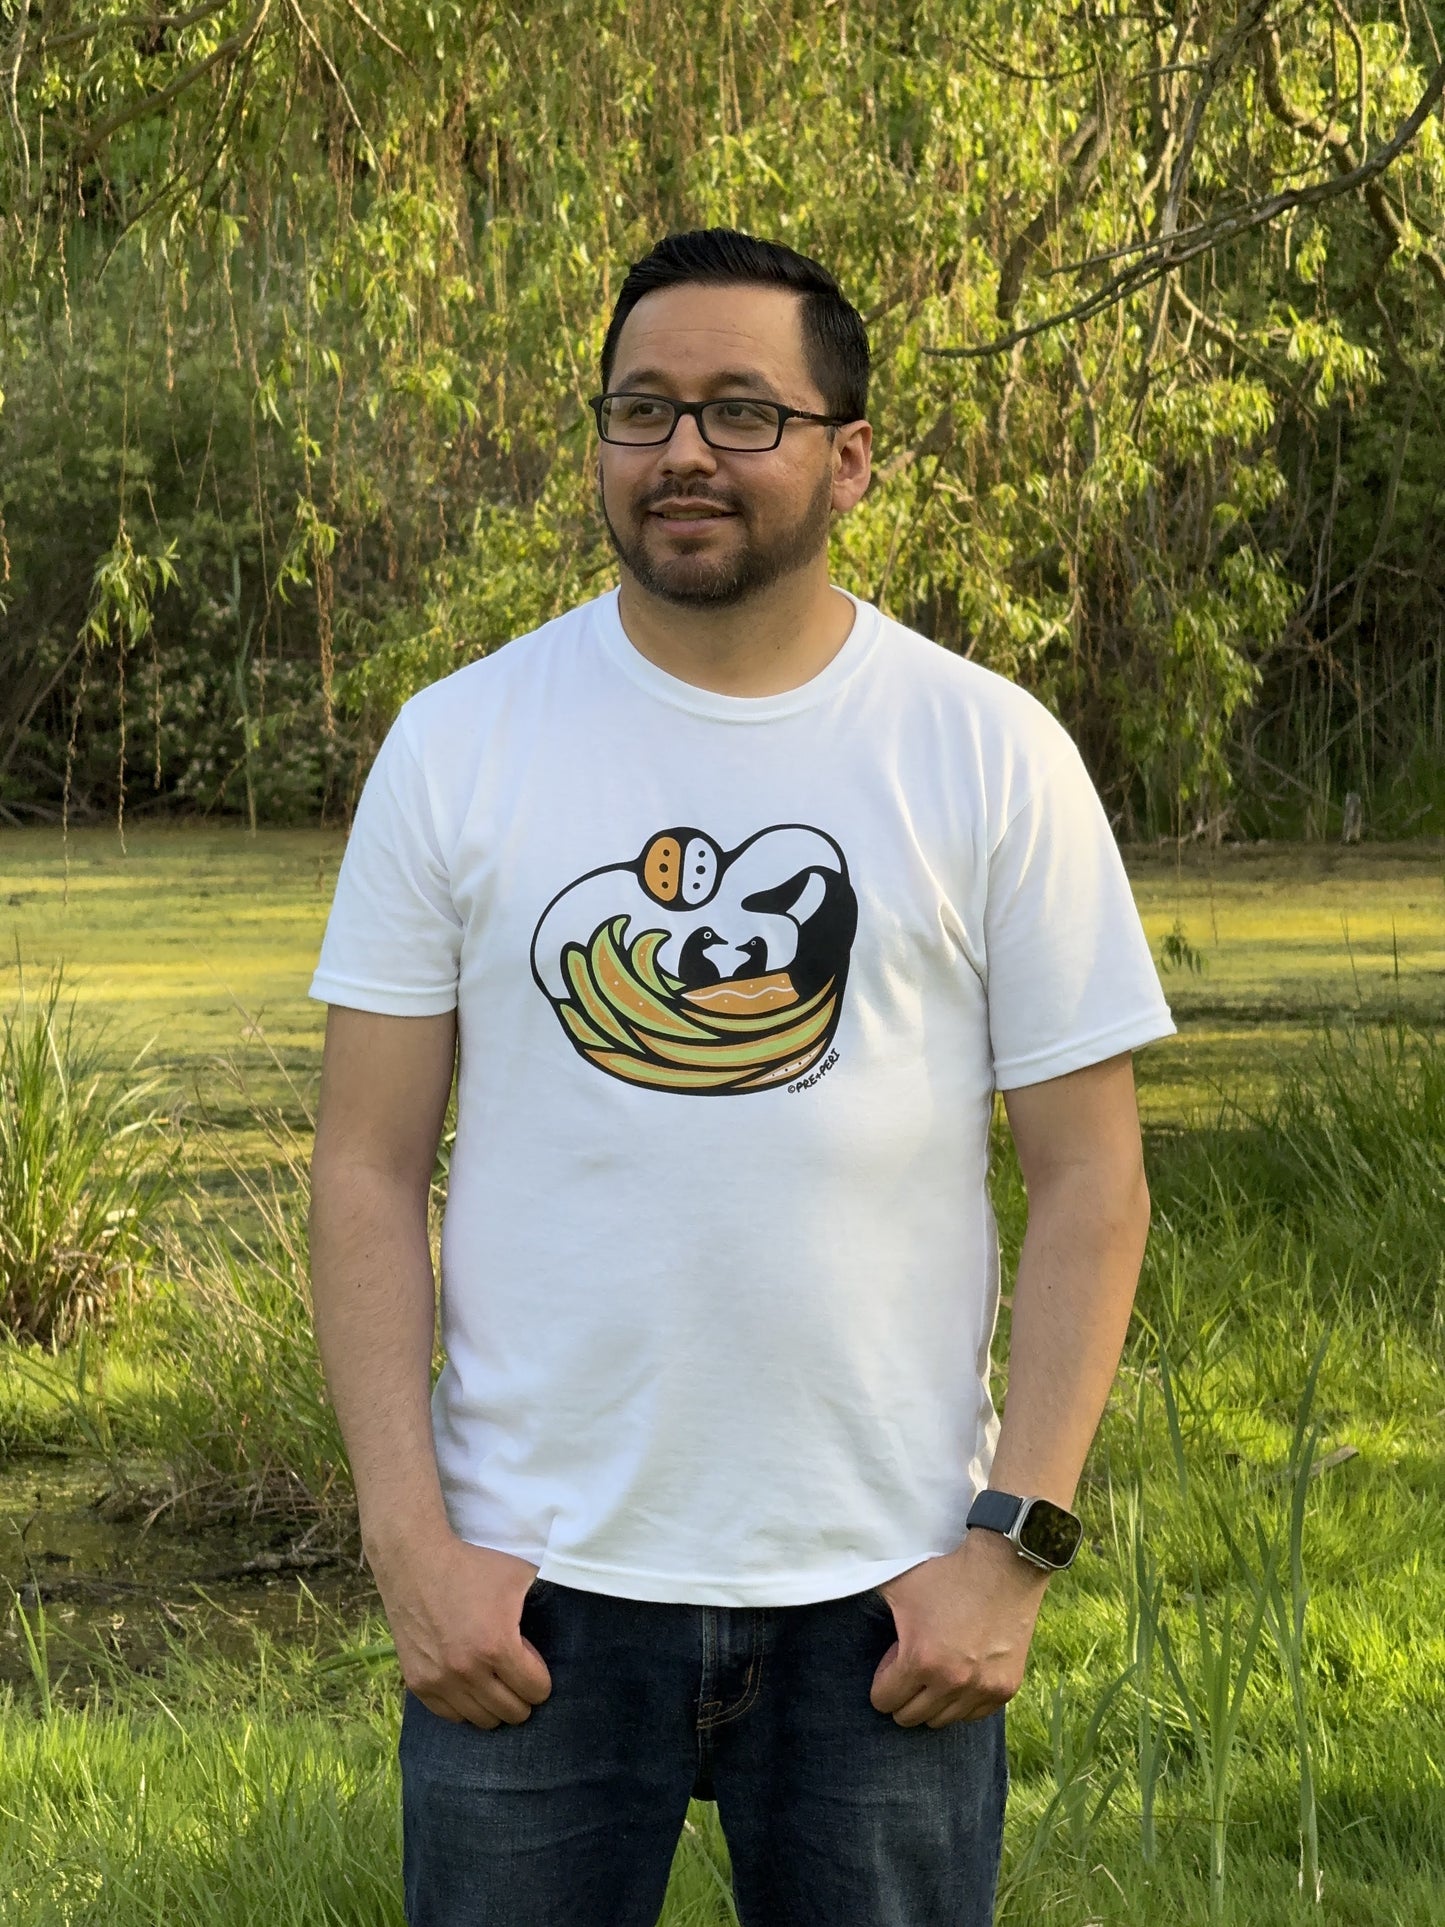 A man wearing a white t-shirt with a Woodland Art style Canada Goose design. The mother goose is keeping her two babies safe in her wings.